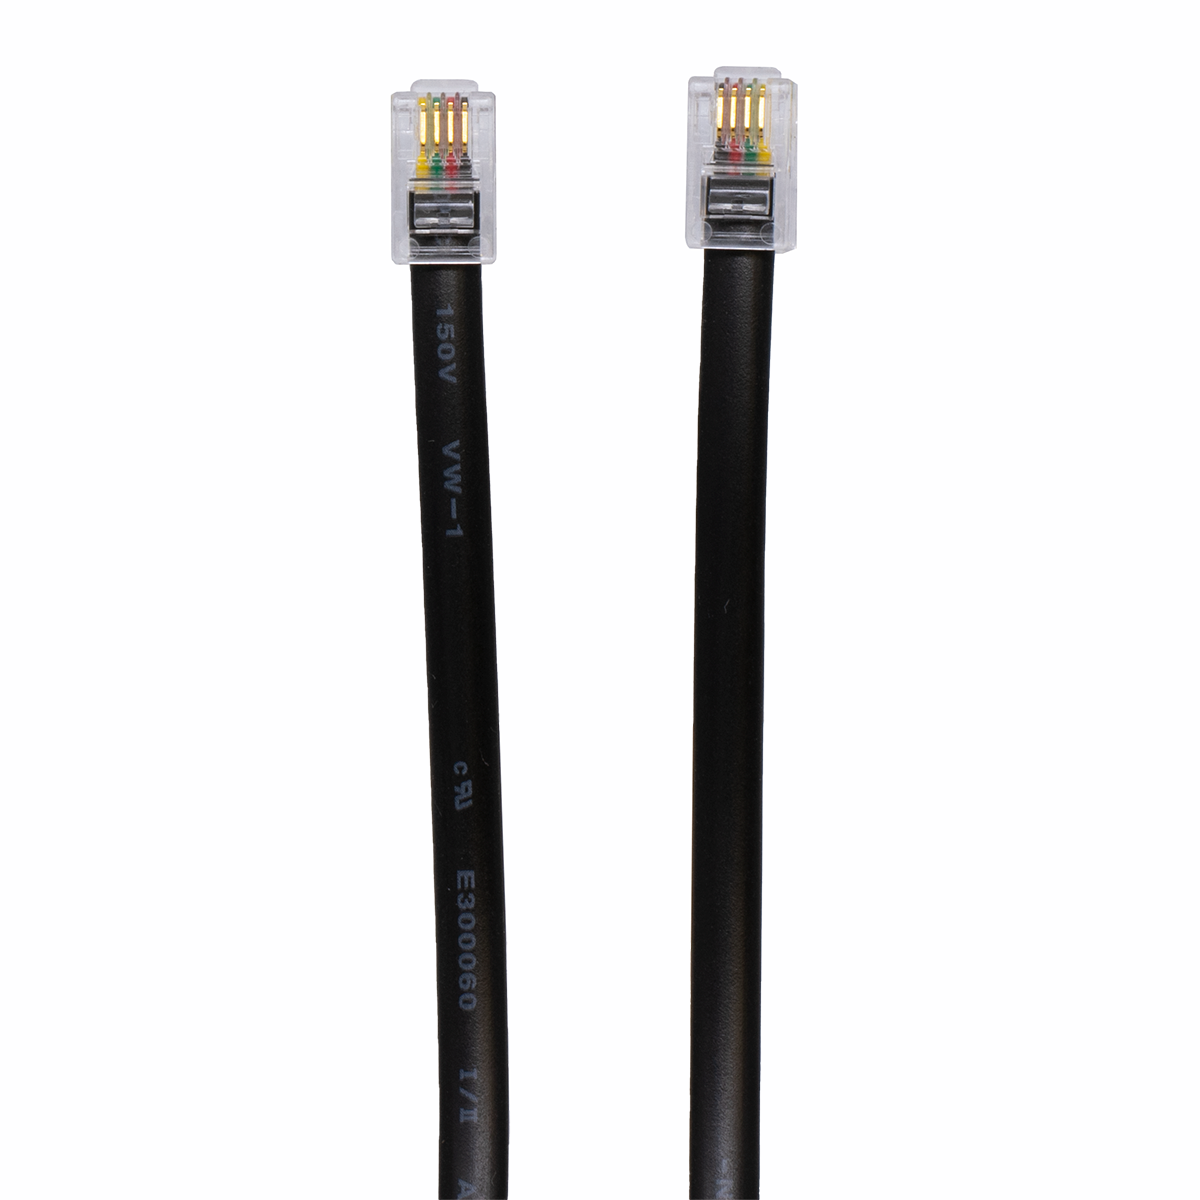 14' Straight (Non-Coiled) Black Handset Cord (Plug View)